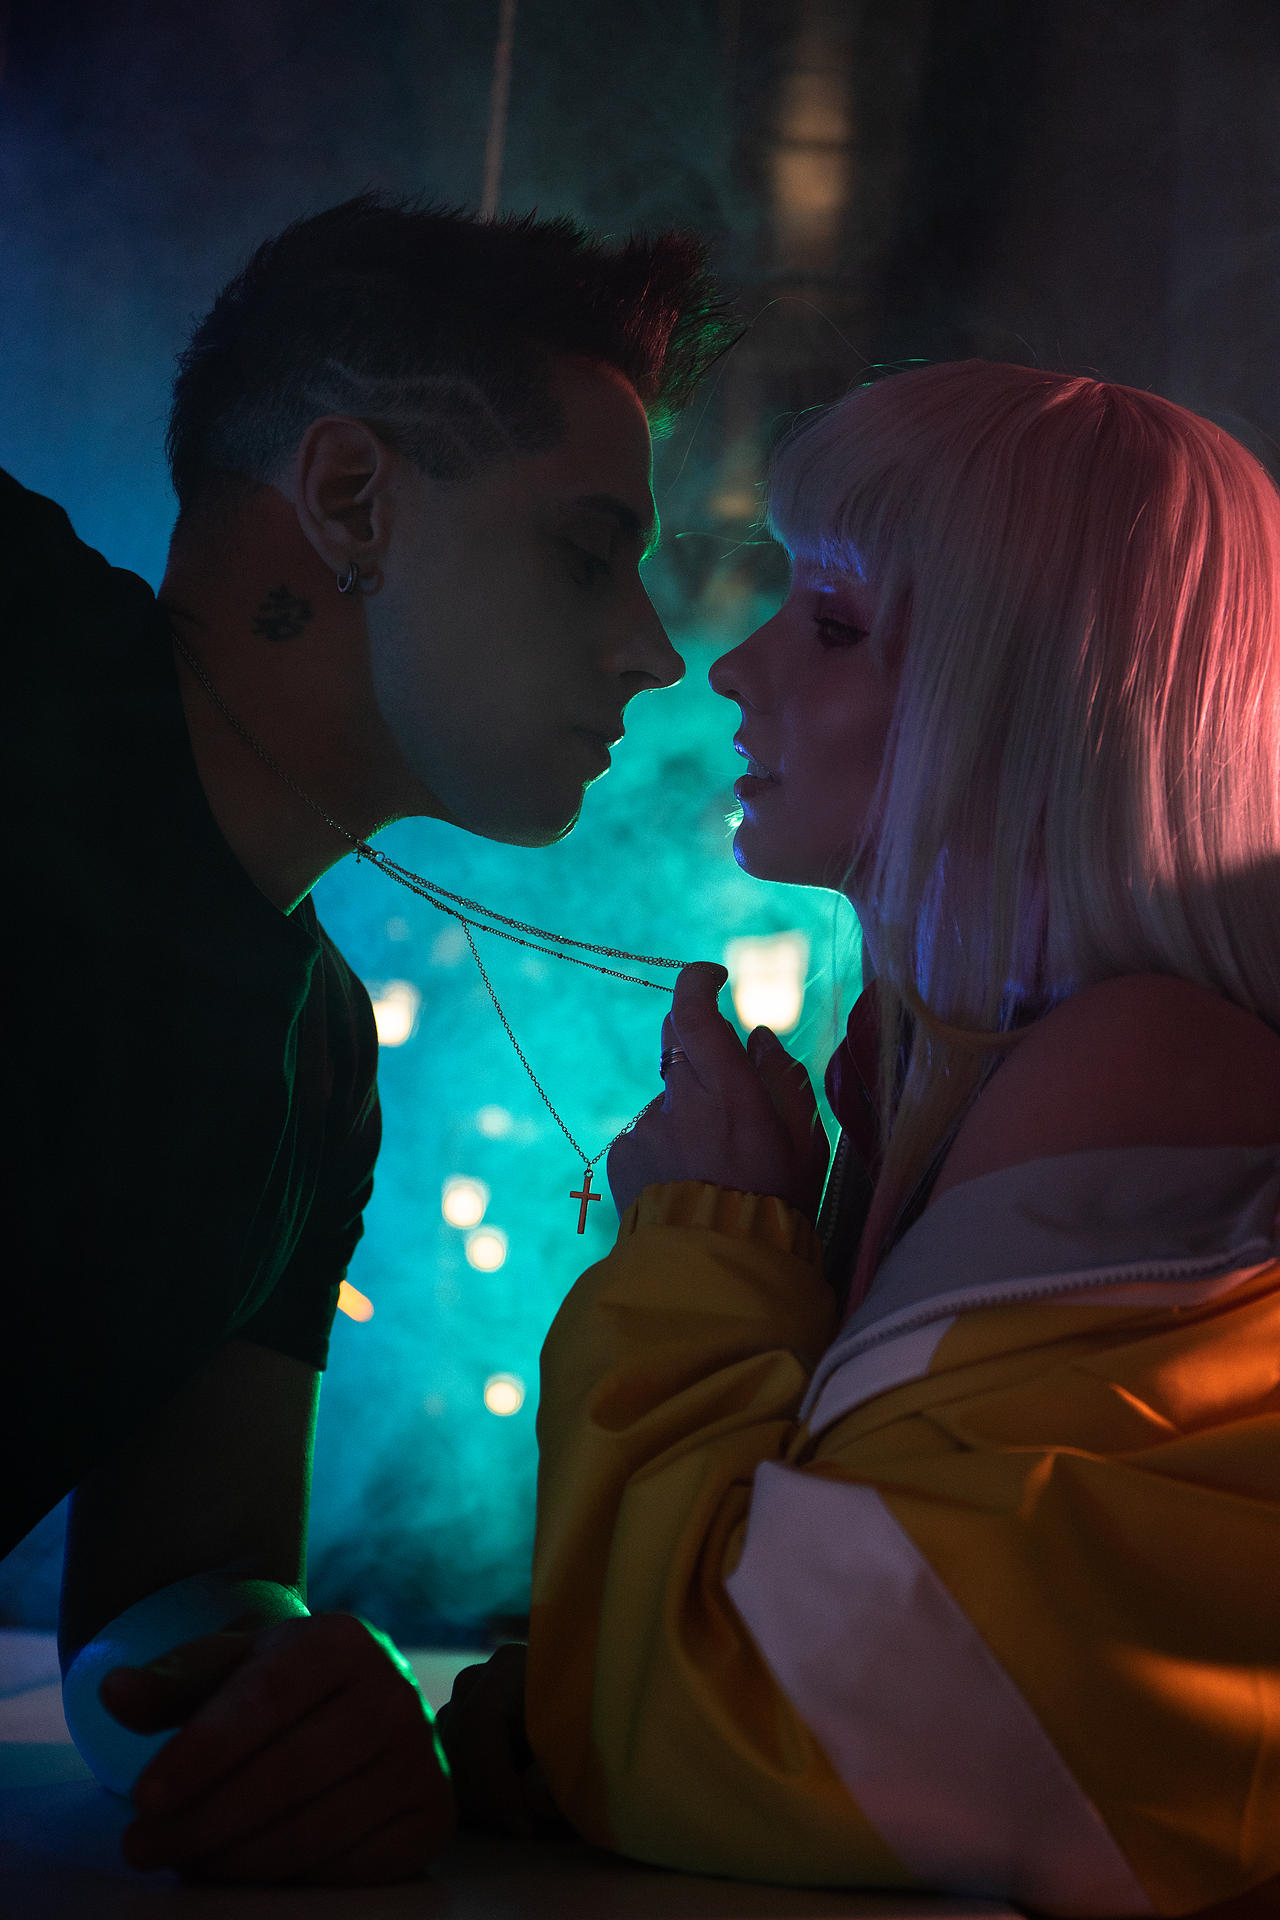 Celebrate the Holidays With David and Lucy From Cyberpunk